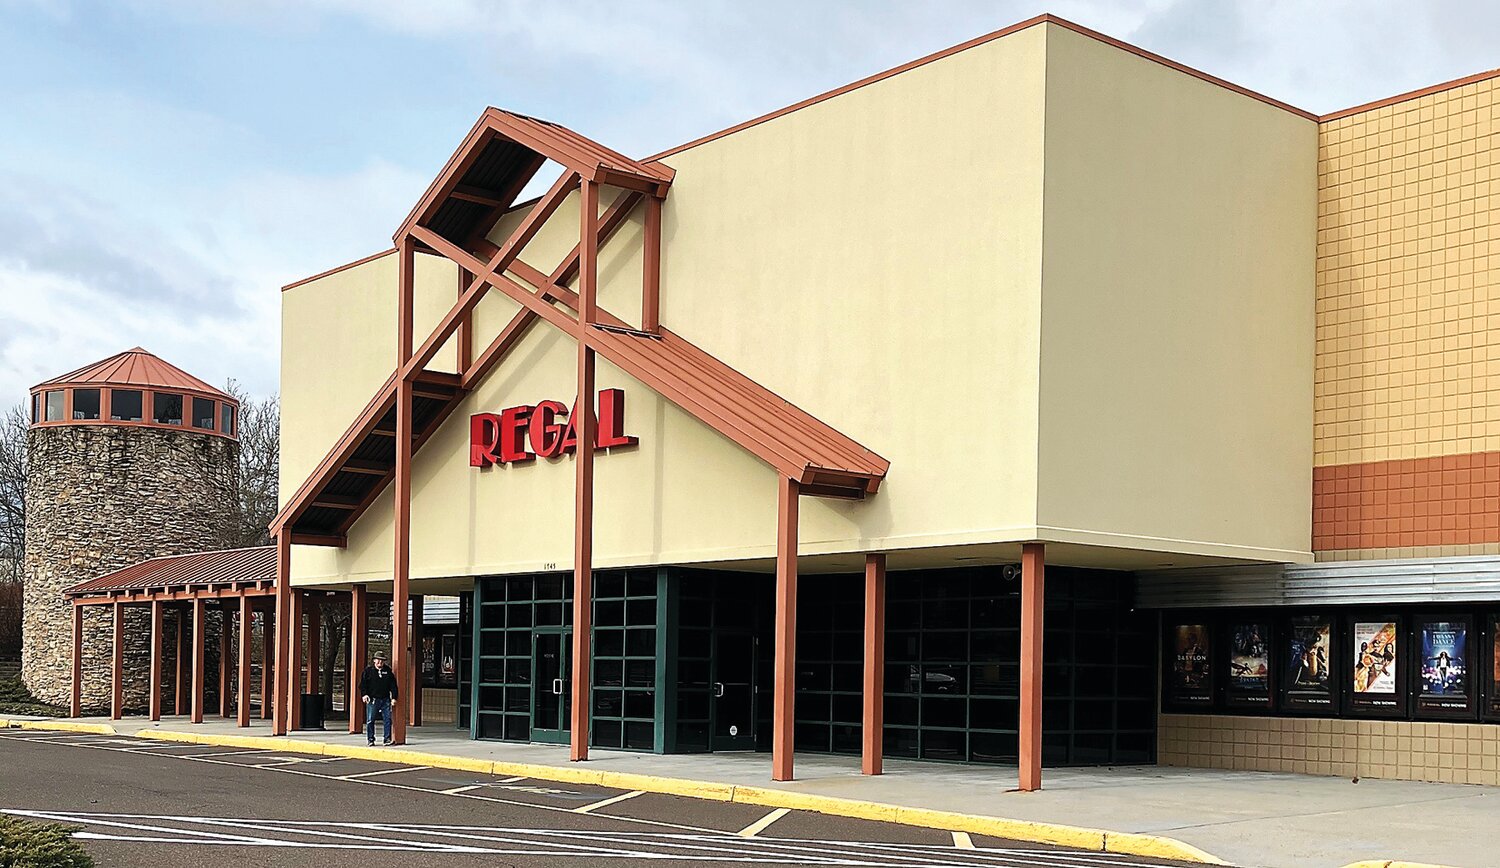 The now-shuttered Regal Barn Plaza 14 movie theater, a longtime staple for Doylestown area moviegoers, is expected to be scheduled for demolition in the near future.